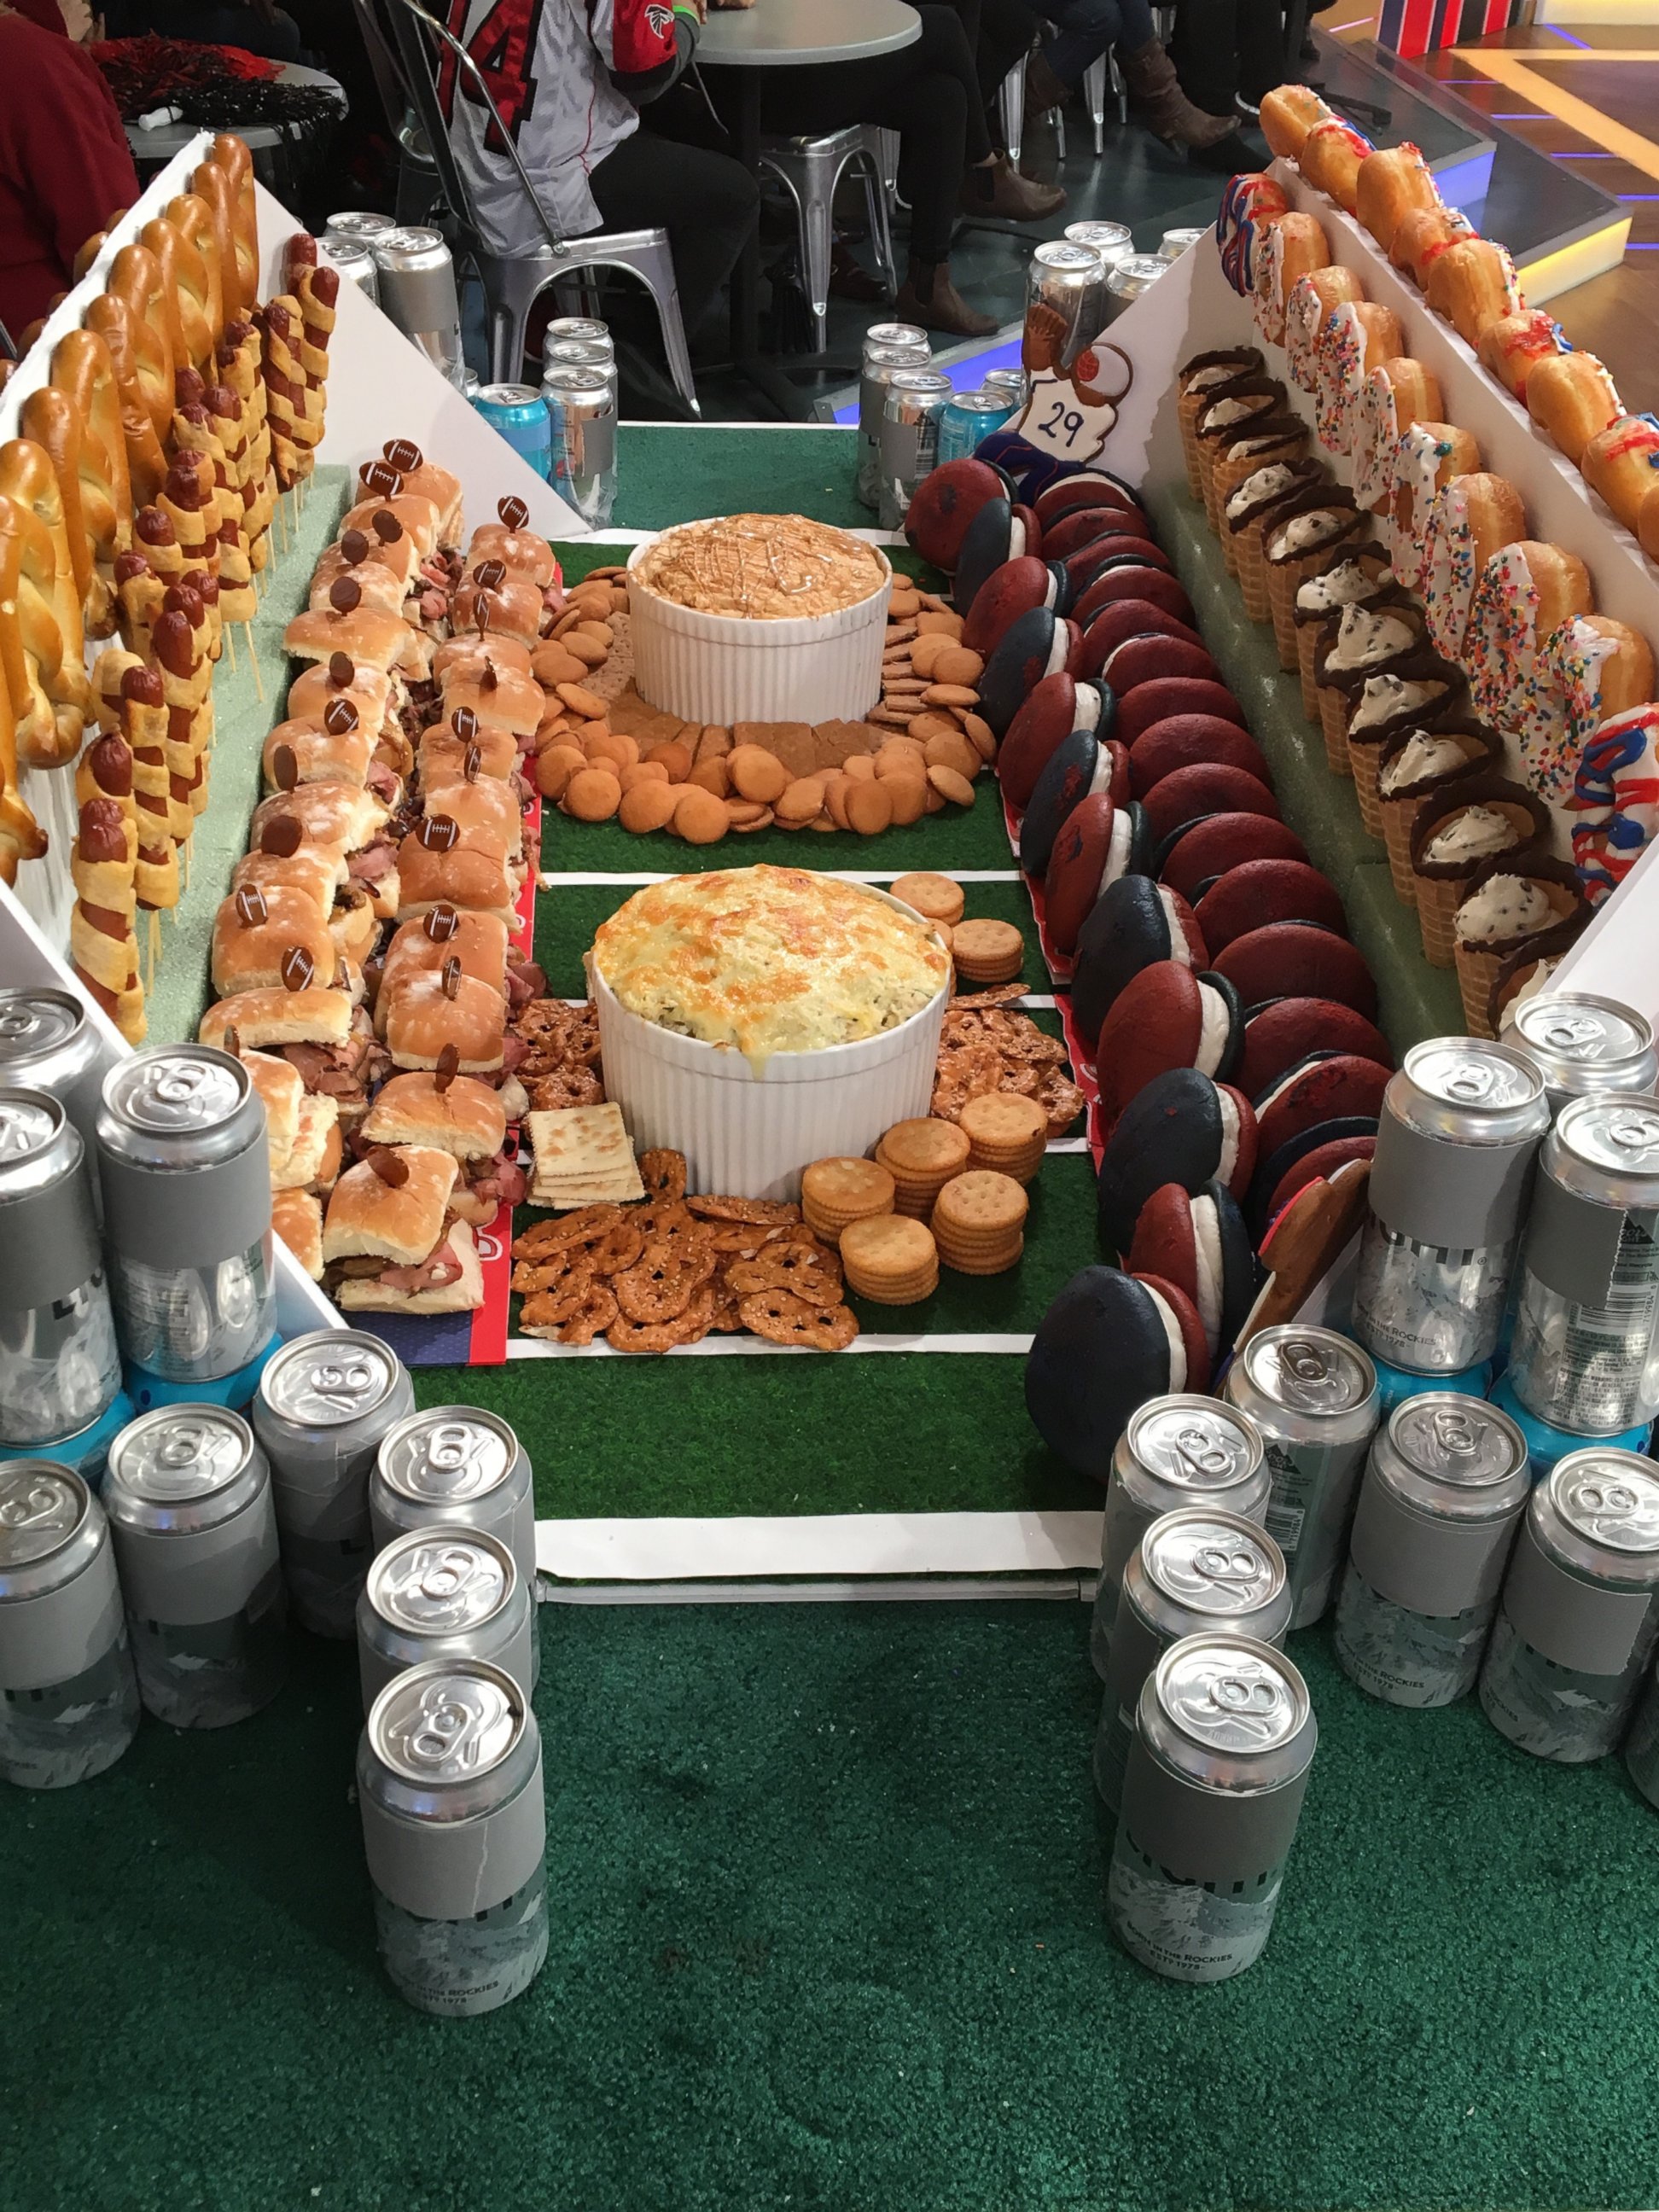 You will wish these stunning 'snack stadiums' were at your Super Bowl party